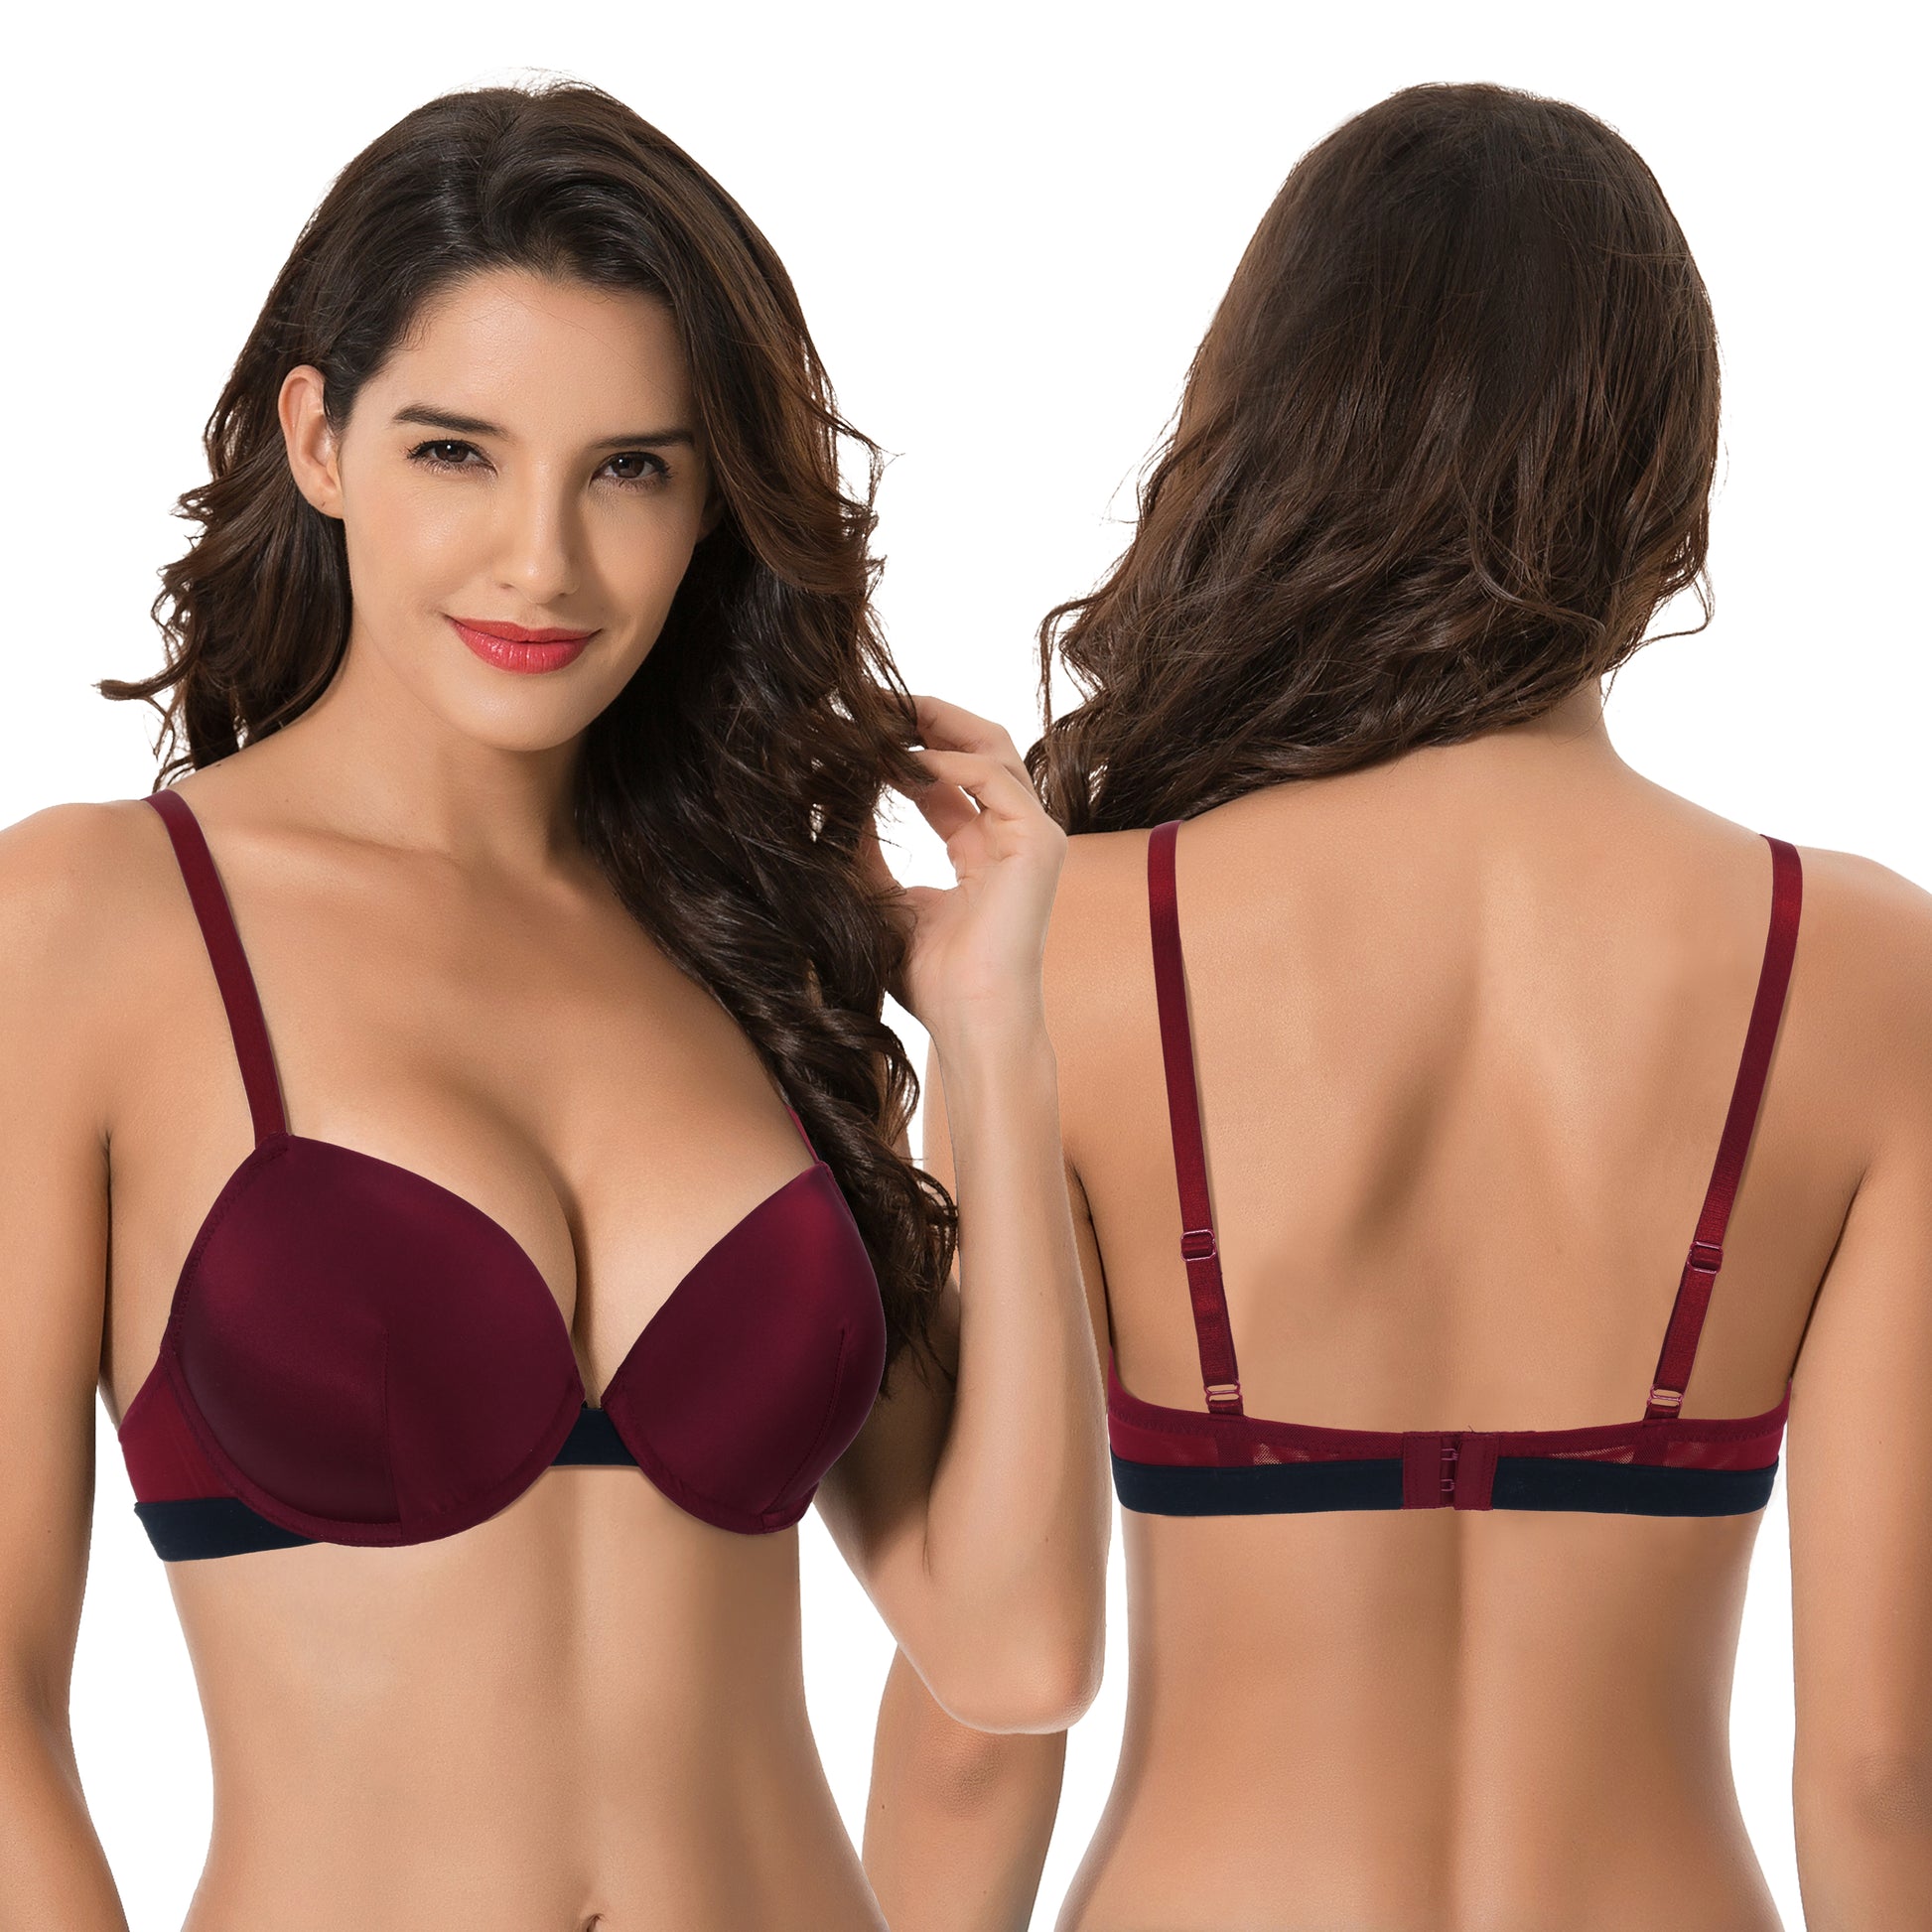 Curve Muse Women's Plus Size Add 1 and a half Cup Push Up Underwire Lace  Bras -2PK-BURGUNDY,NUDE-42B